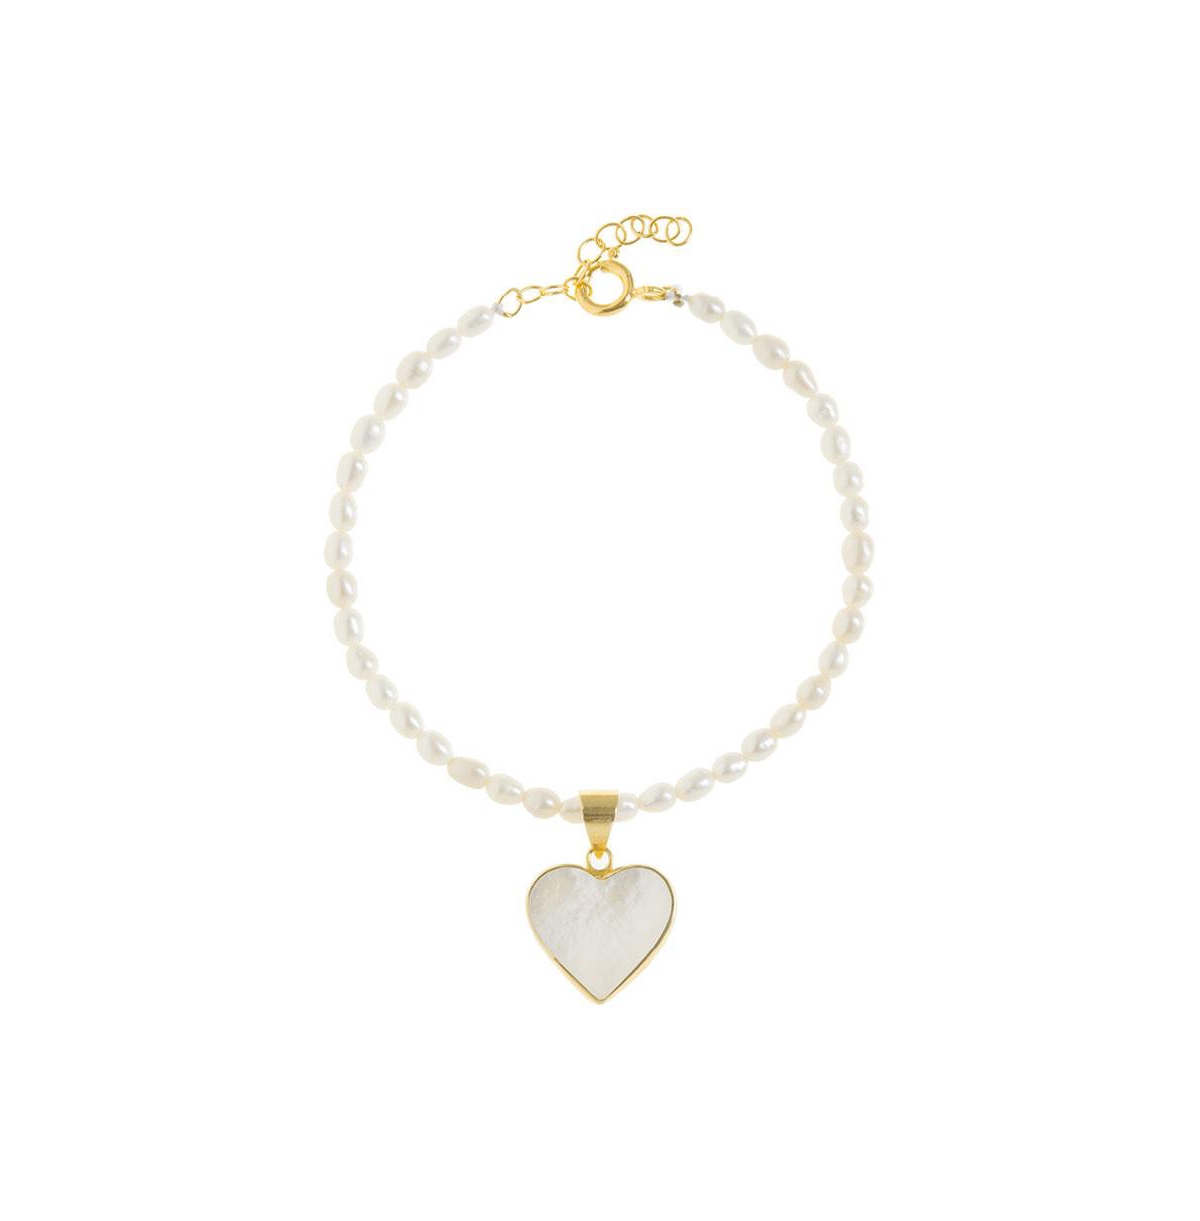 Rice Pearl Bracelet with Heart Charm - White